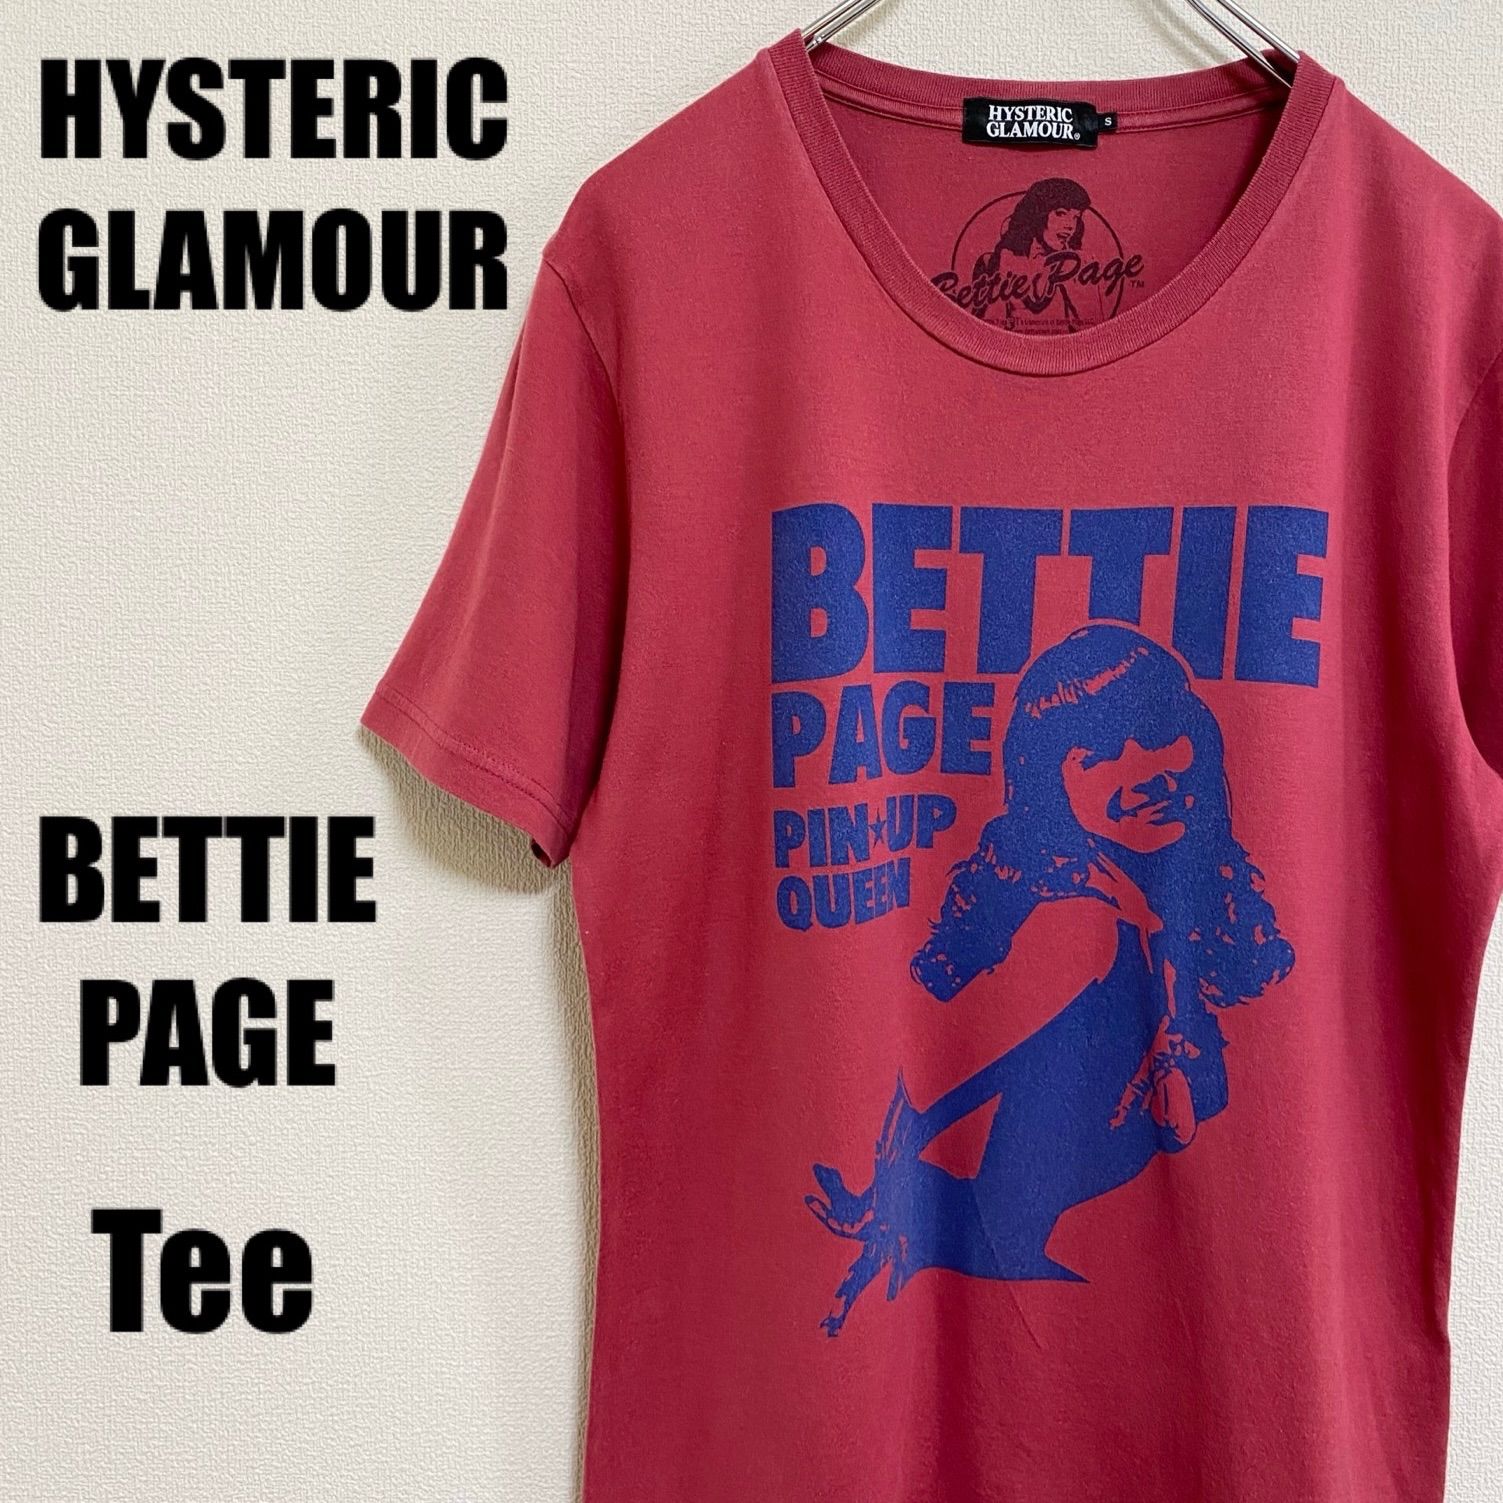 Bettie Page skirt／pink